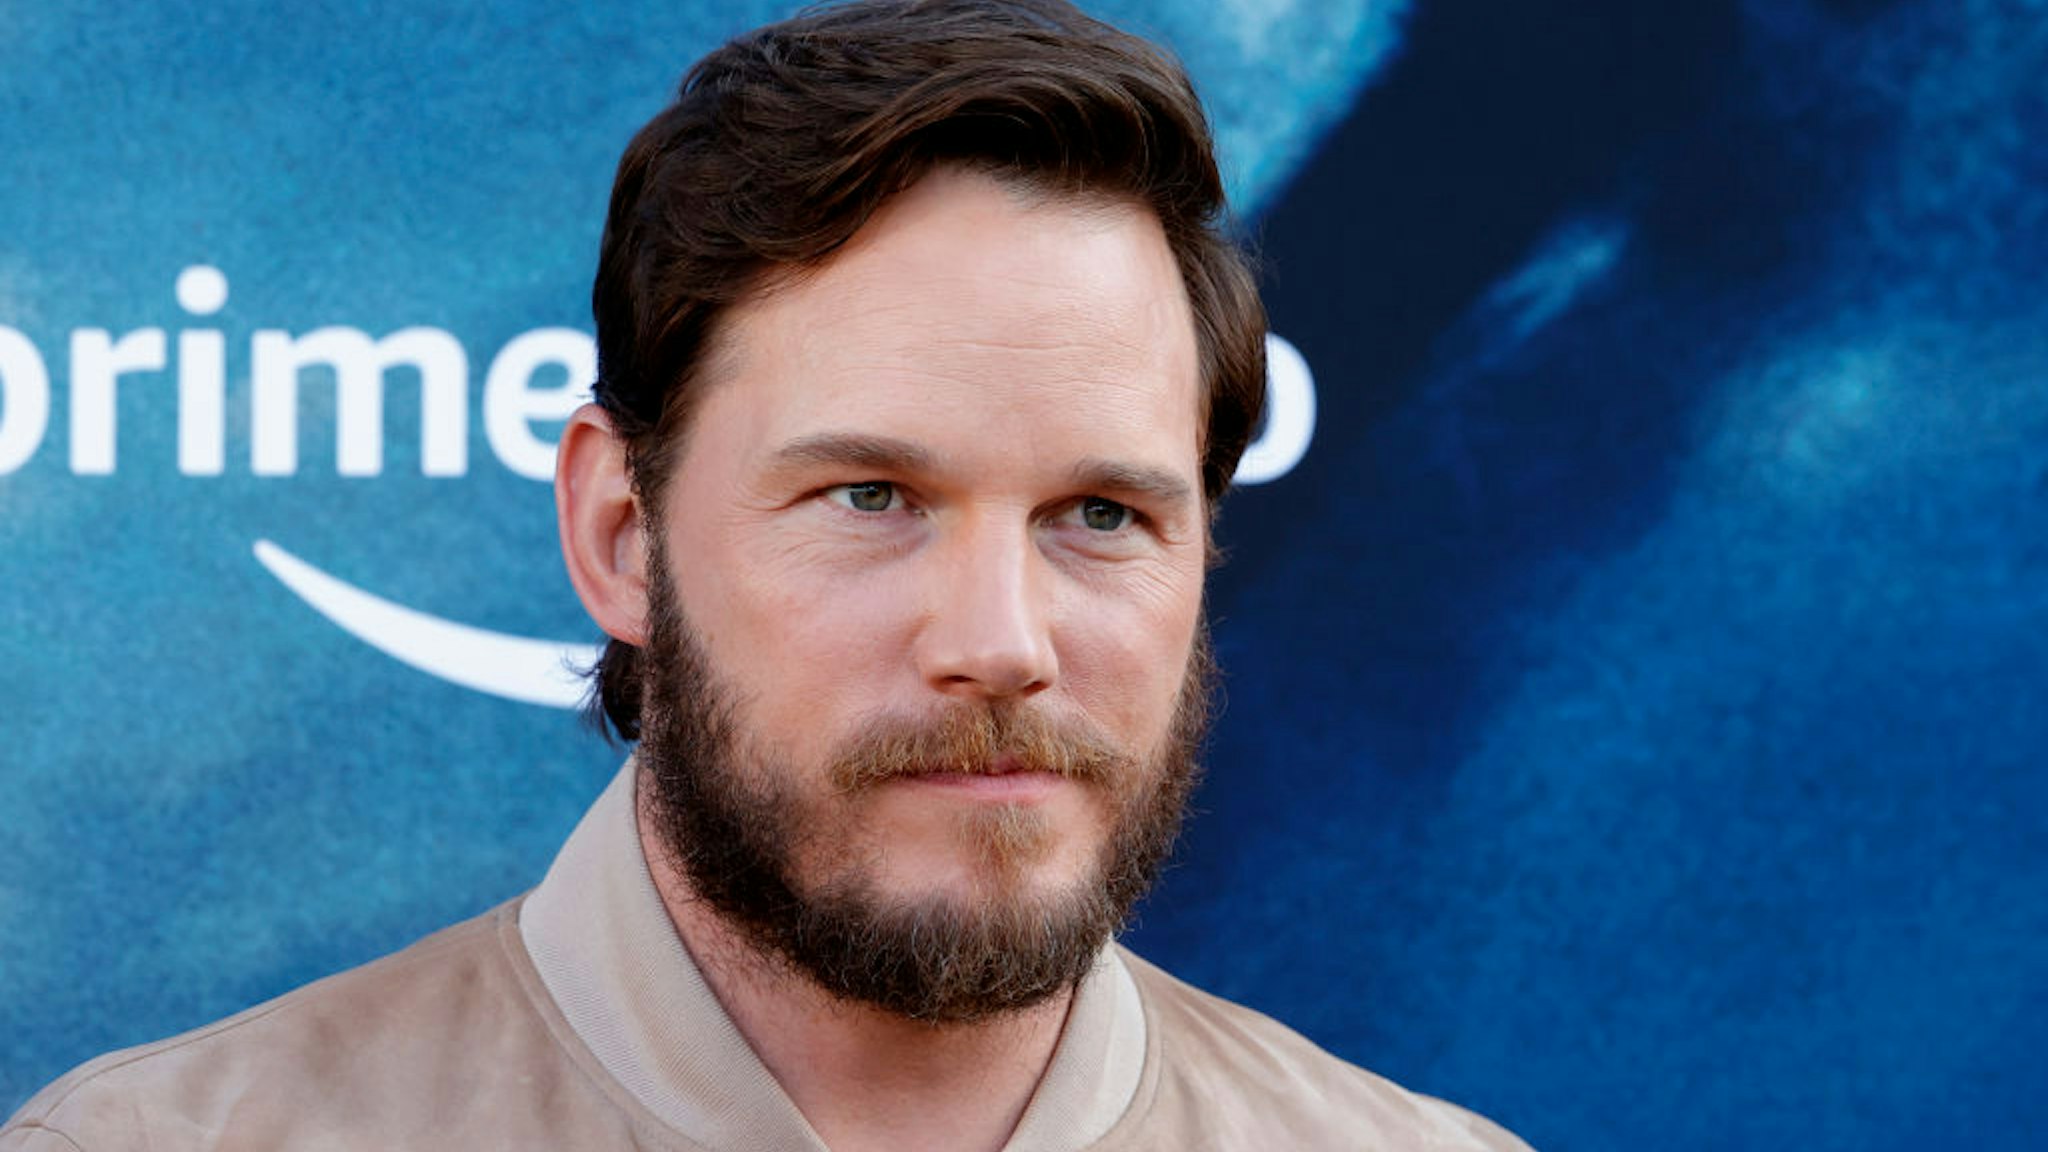 Chris Pratt attends Los Angeles Premiere Of Amazon's "The Tomorrow War" Premiere at Banc of California Stadium on June 30, 2021 in Los Angeles, California.